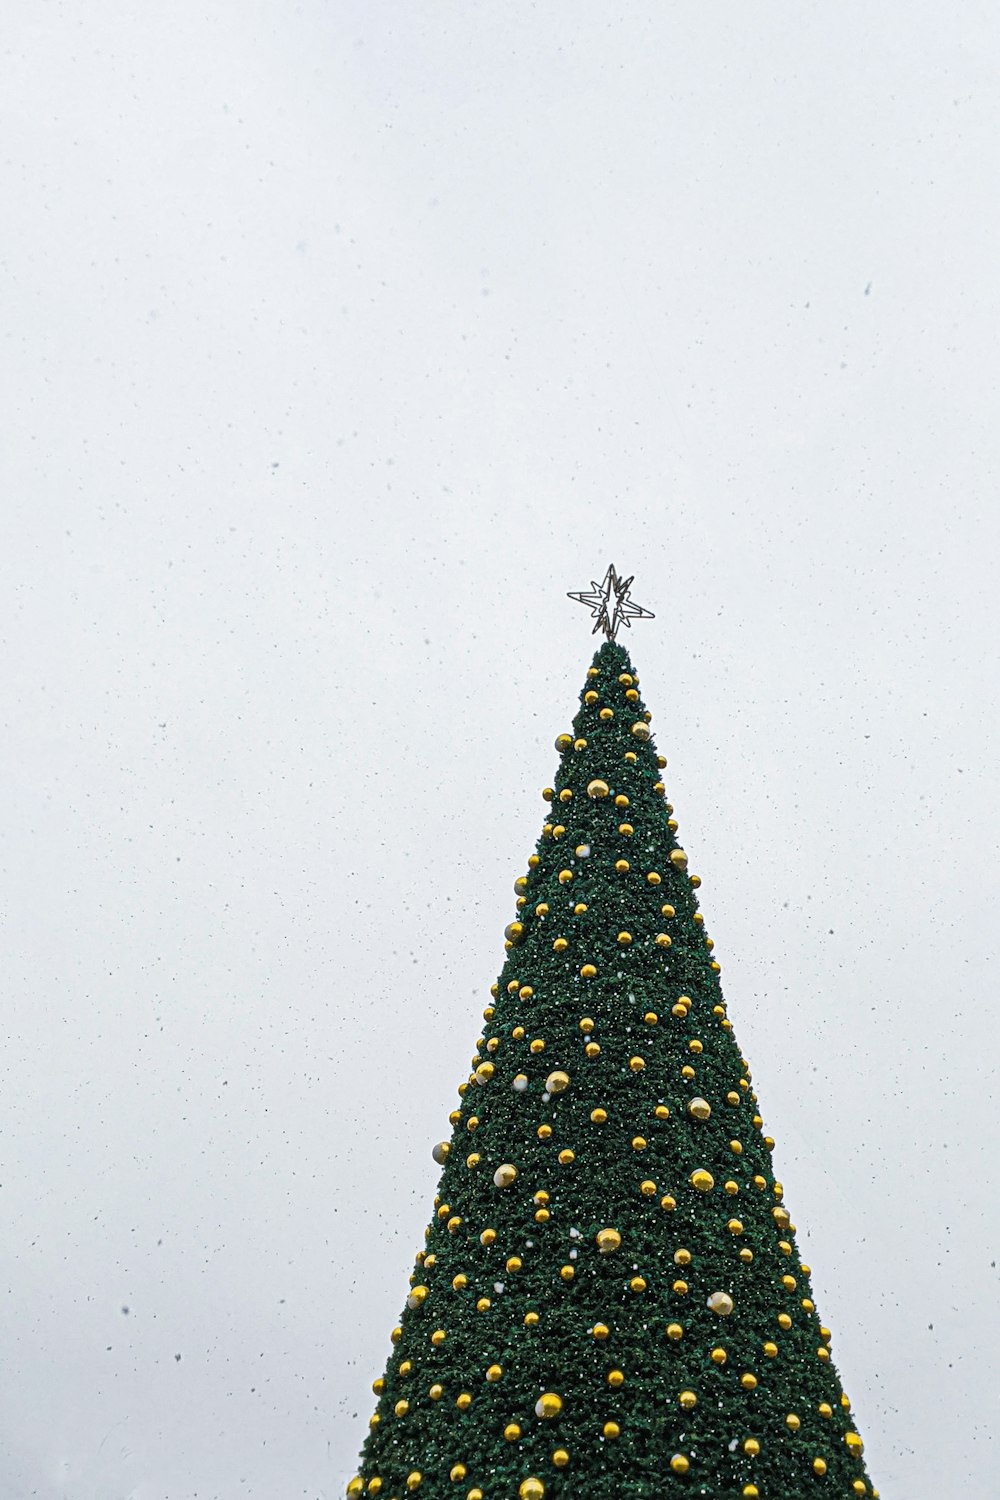 low-angle photography of green Christmas tree with yellow bauble and silver star topper